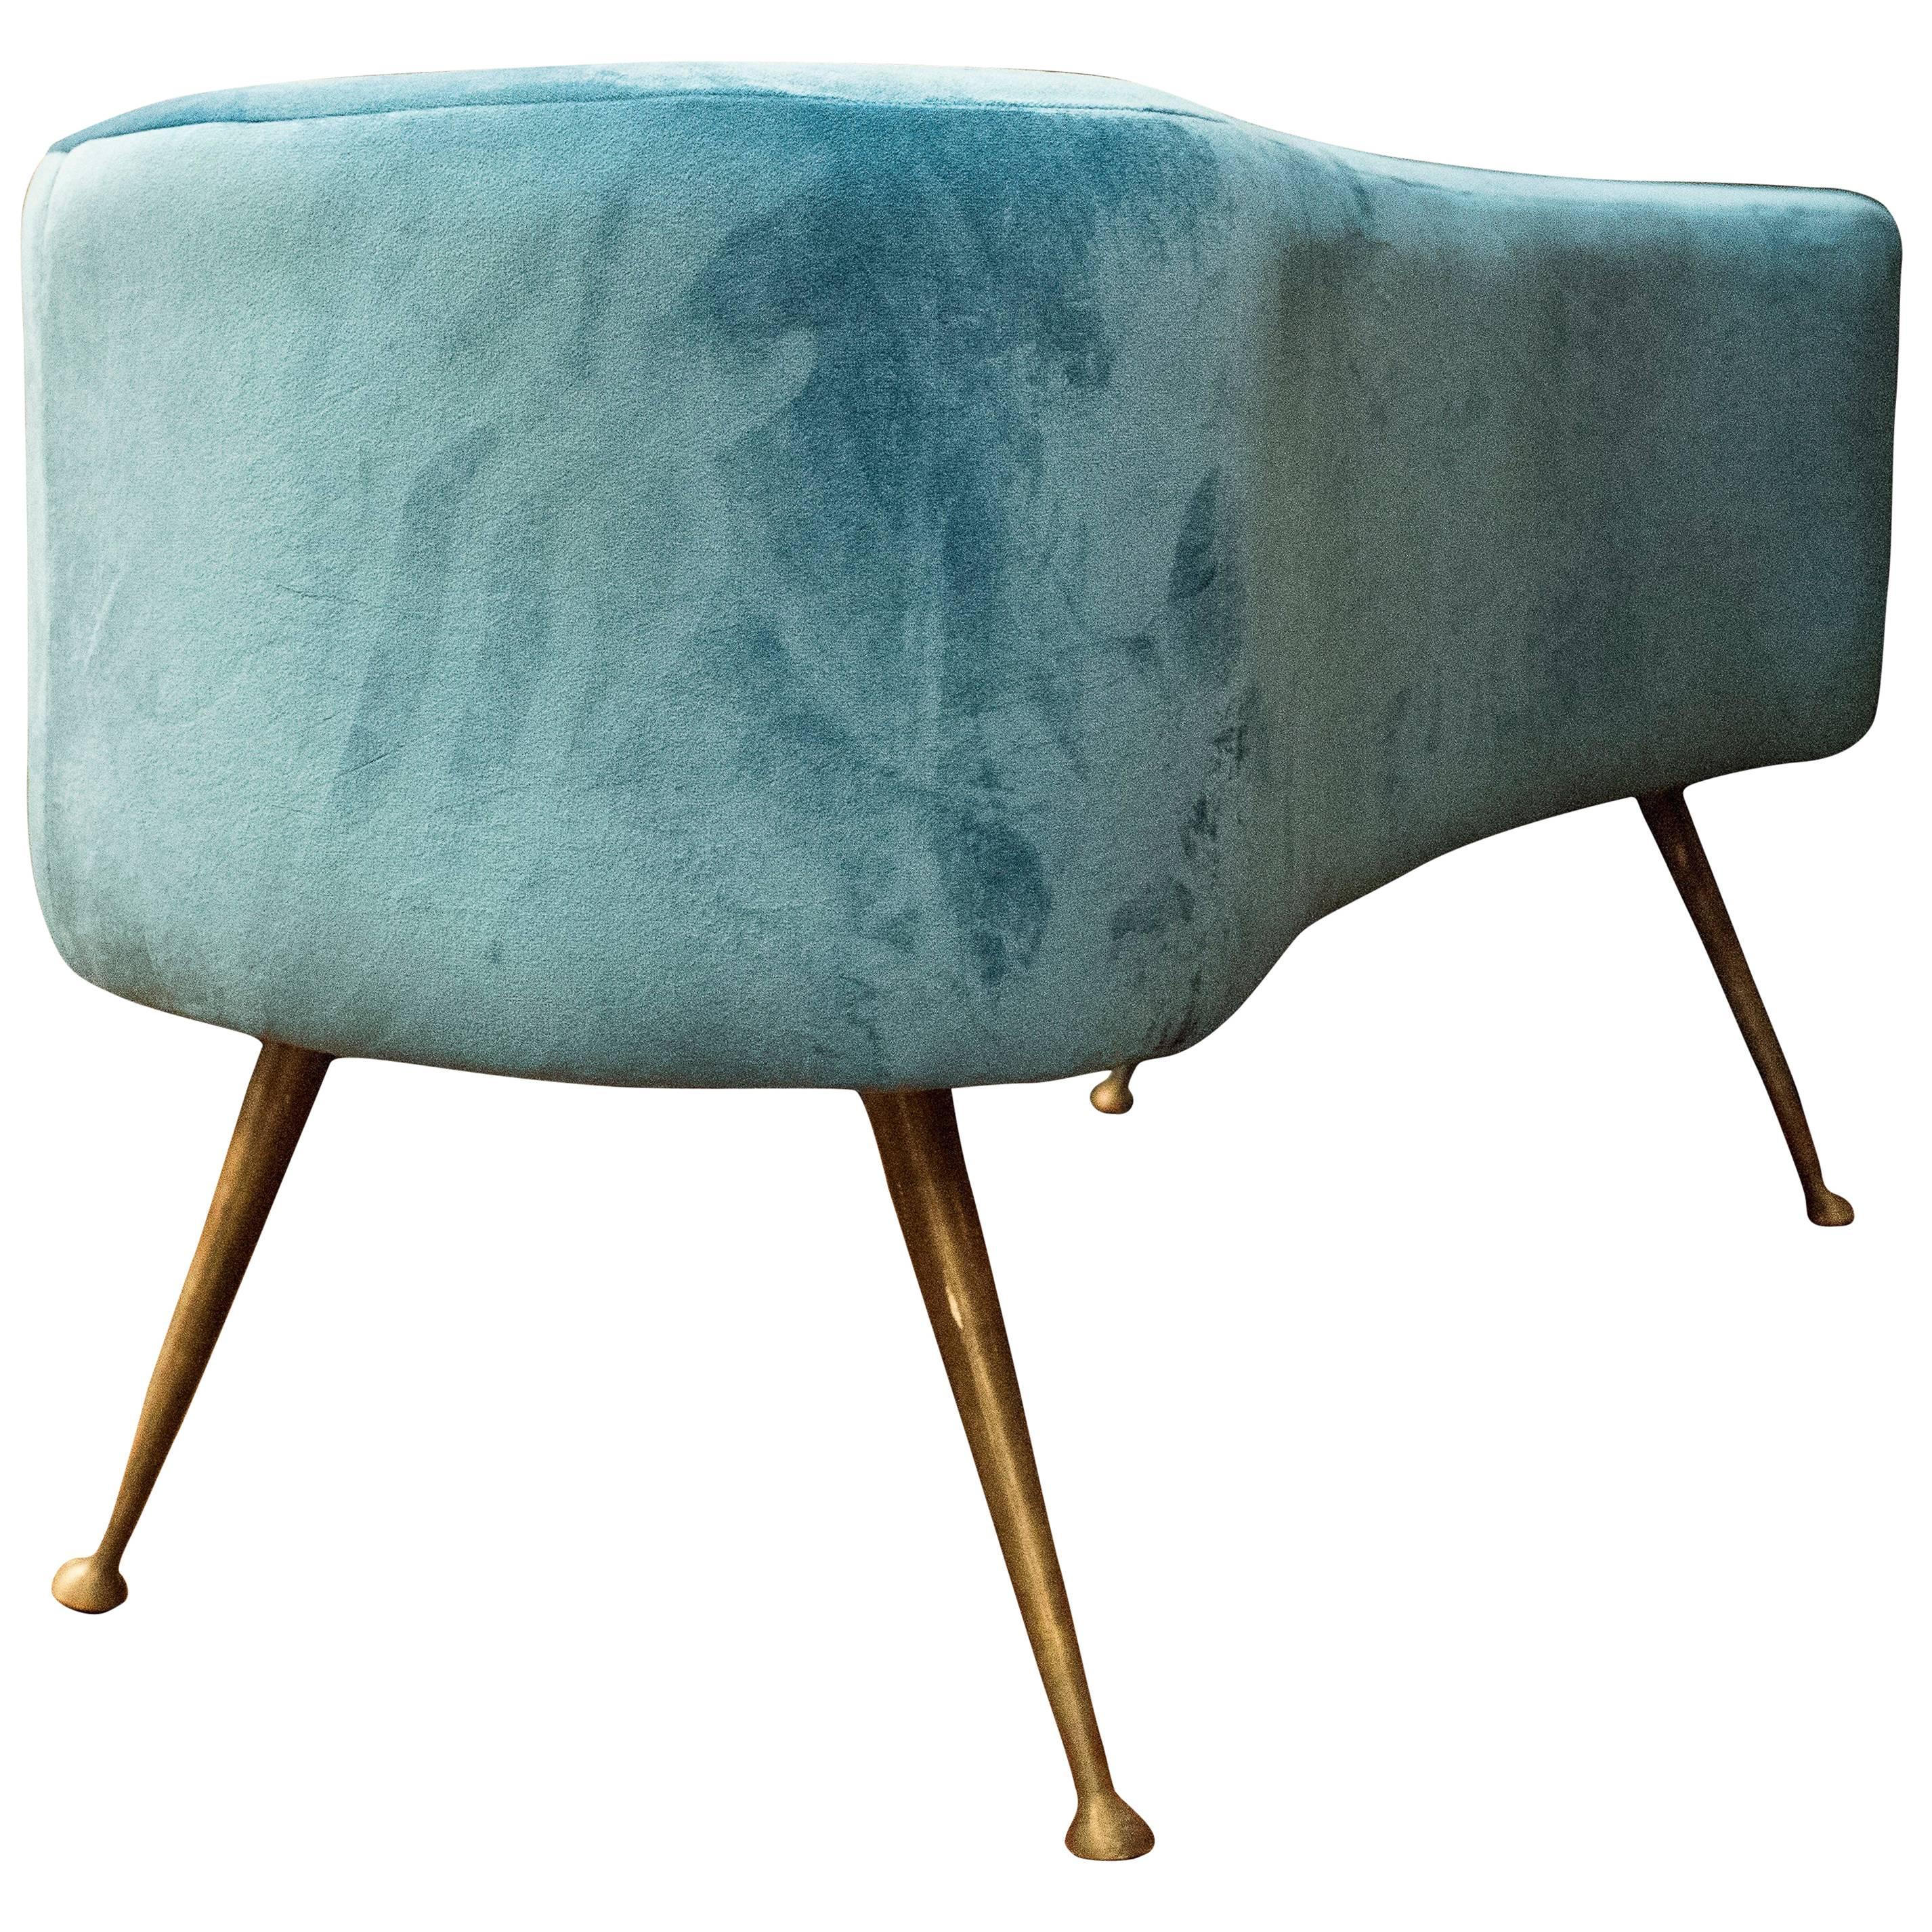 Gio Ponti, One of a Kind Stool in Blue Velvet Color, Italy, 1950